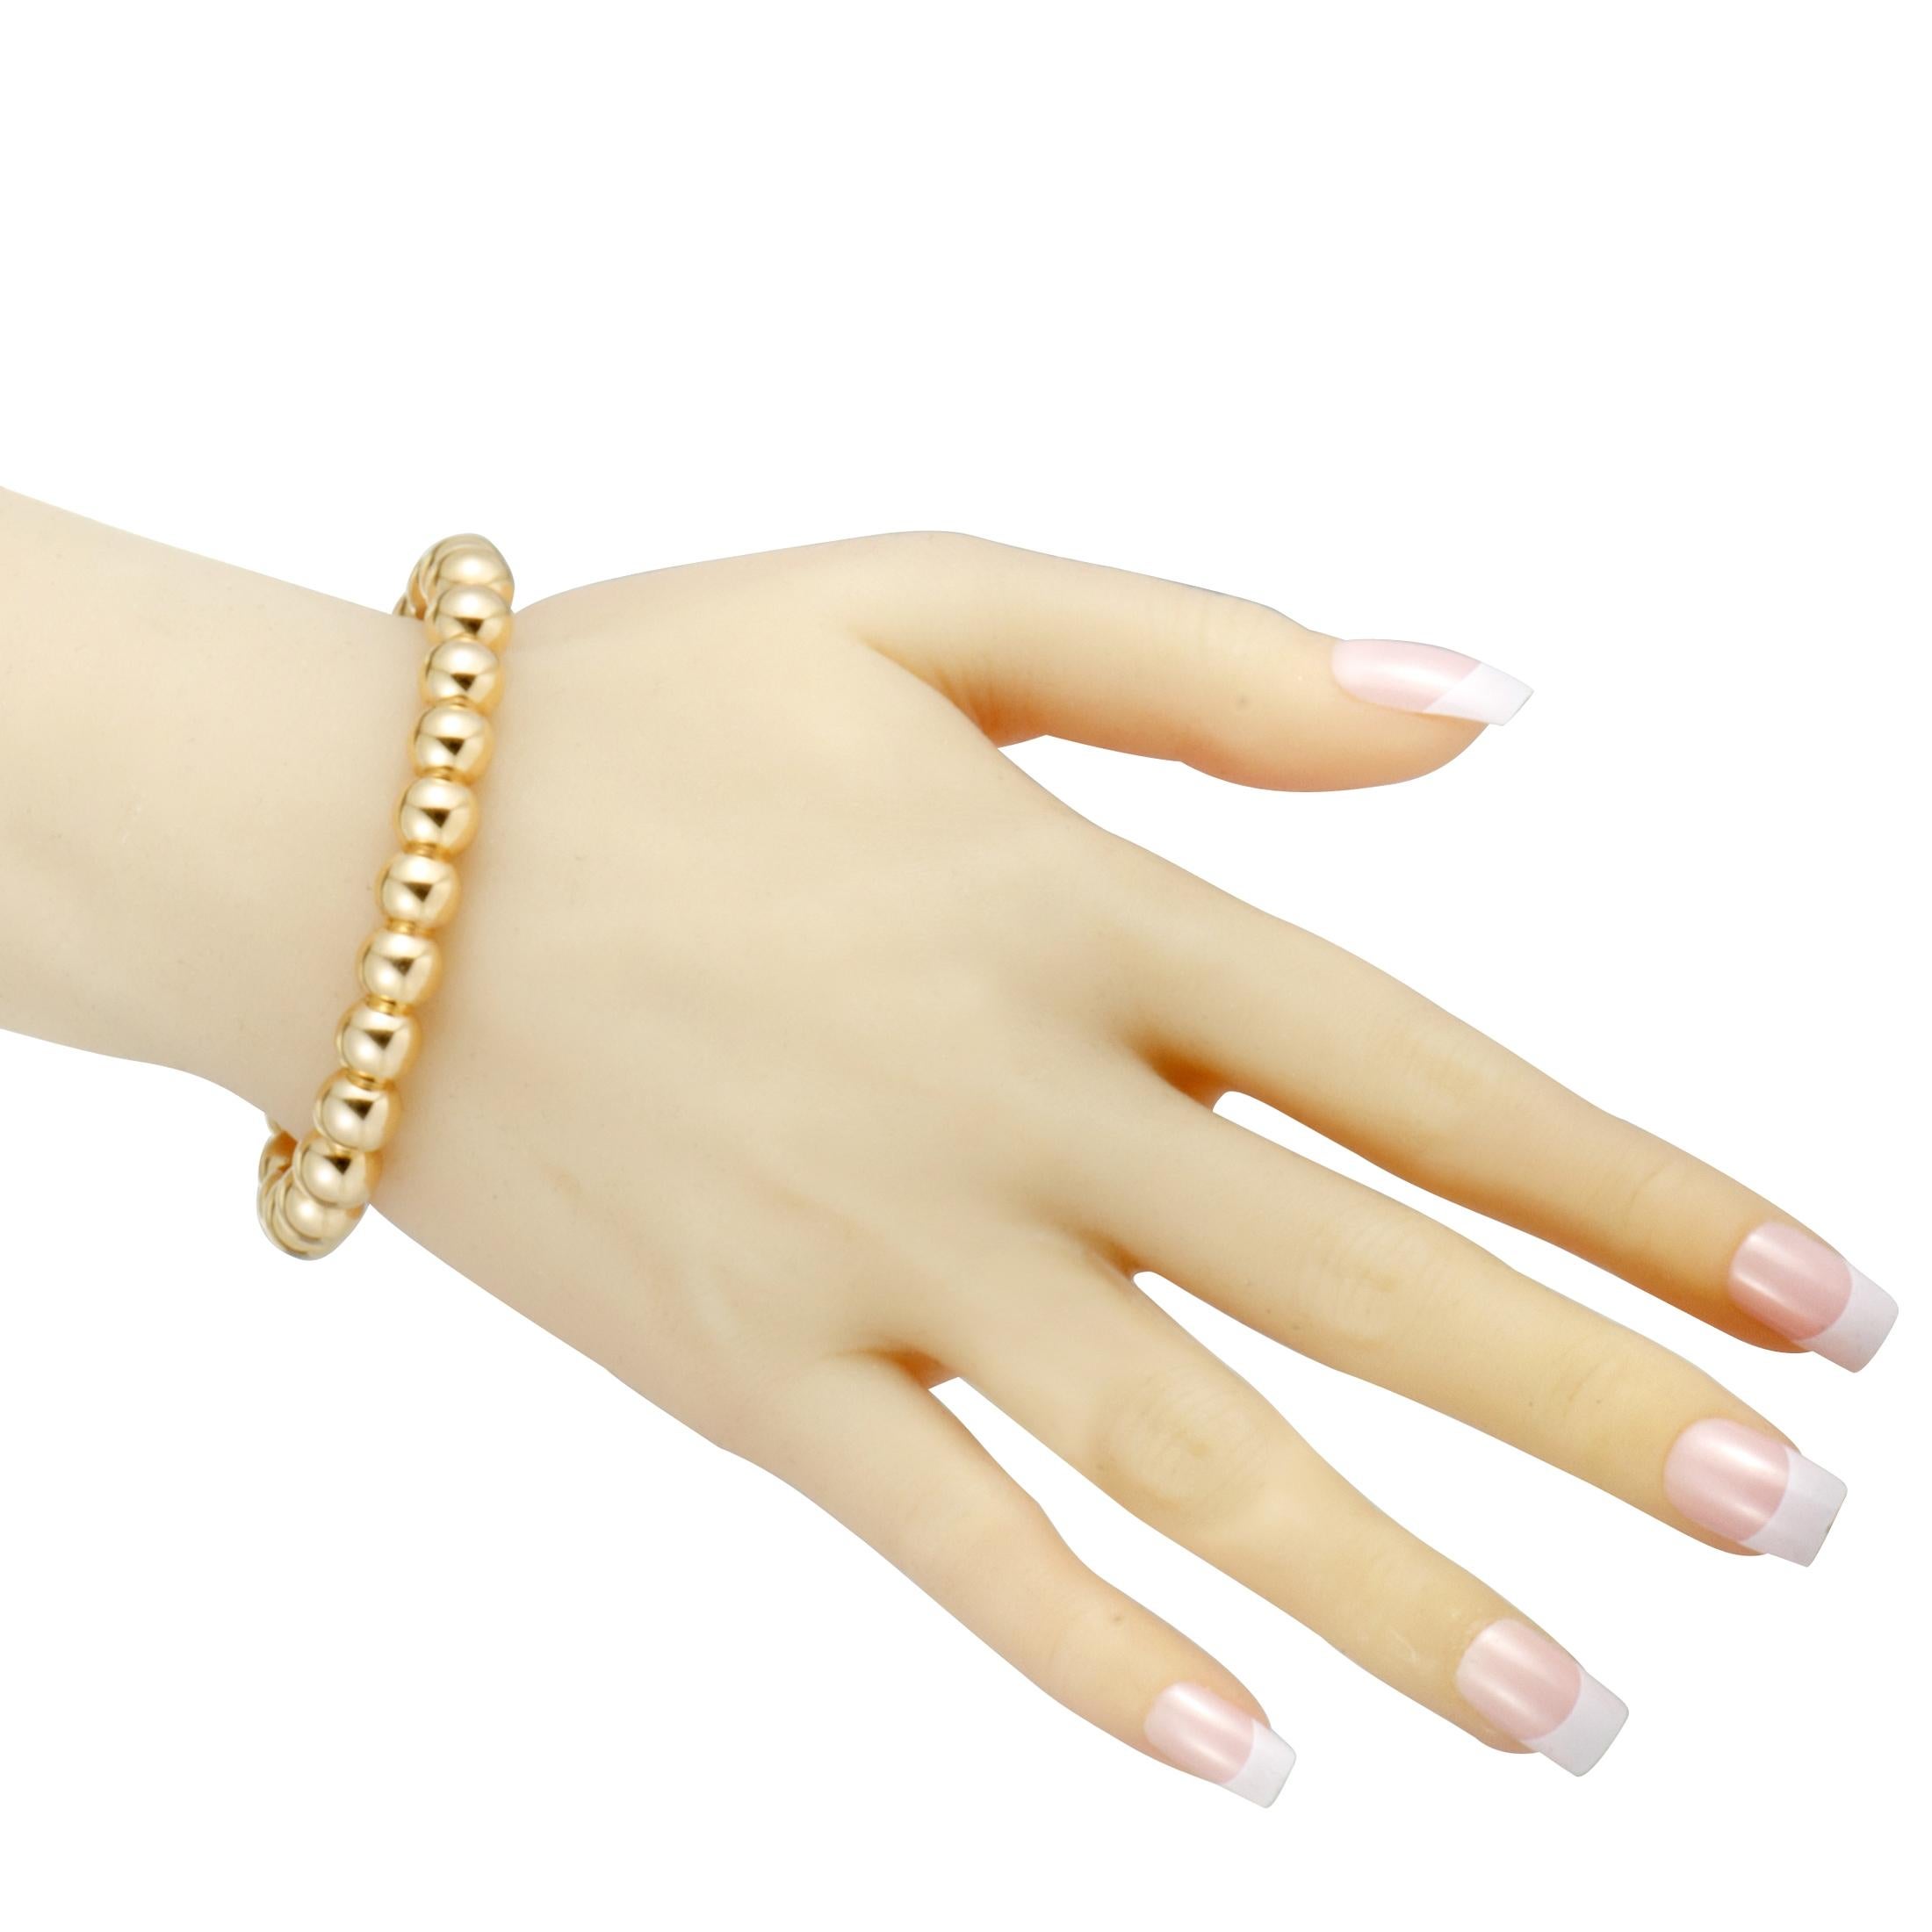 Add a gorgeously feminine touch to your ensembles with this wonderful Van Cleef & Arpels bracelet that is created for the exquisite “Perlée” collection, boasting an incredibly attractive design. The bracelet is beautifully made of 18K rose gold and